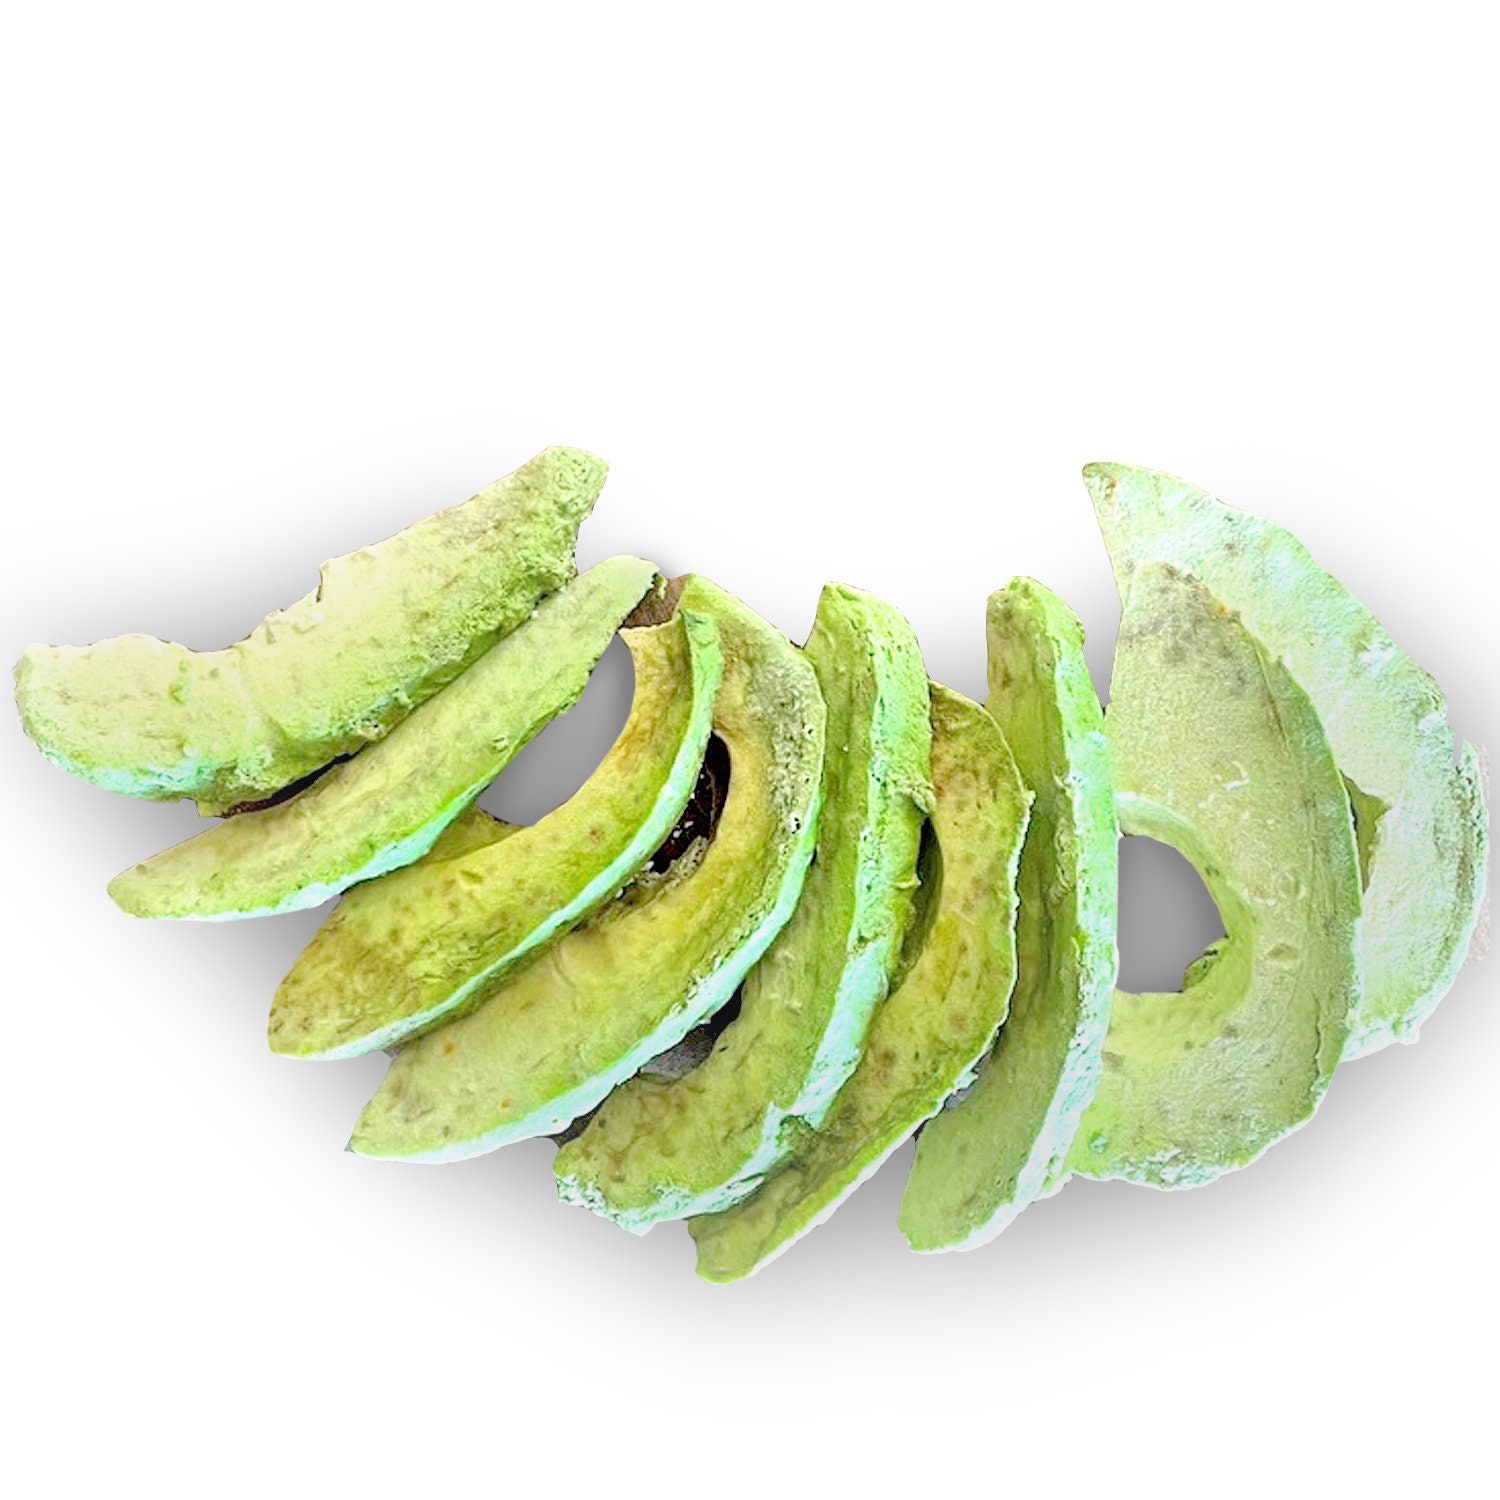 Delicious Freeze-dried Avocado Slices With Sea Salt Organic picture